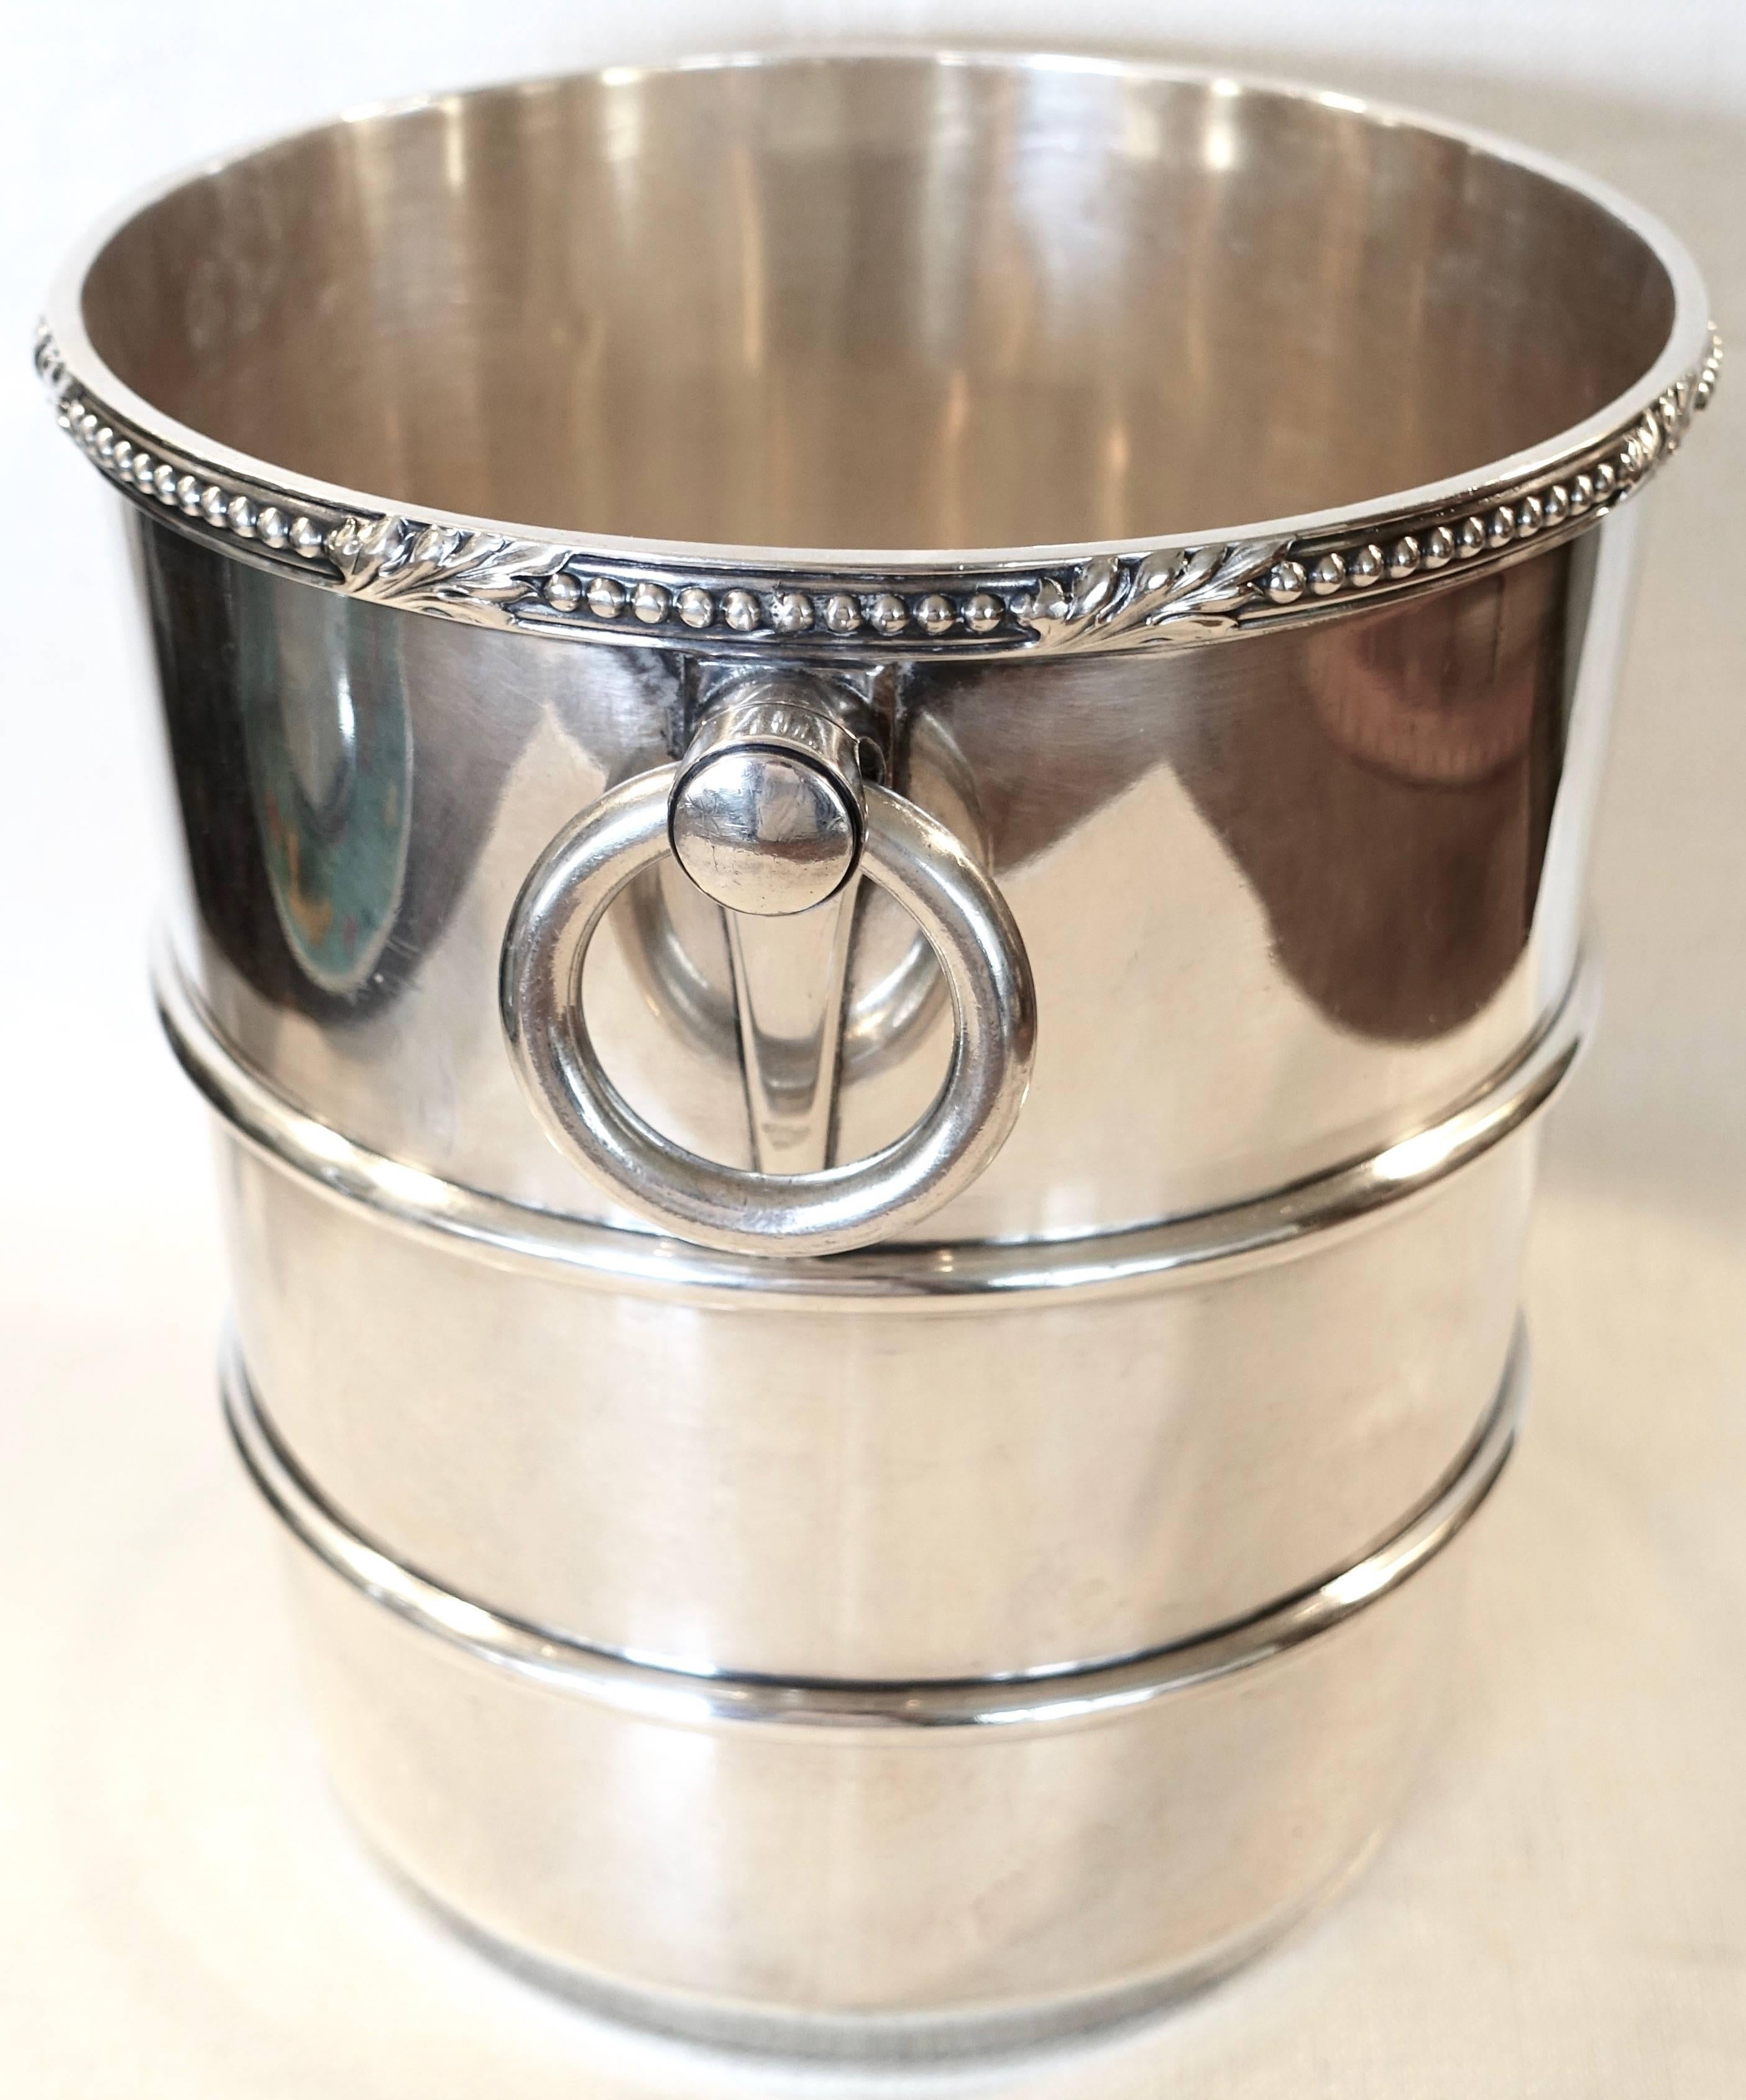 Very nice restaurant silver plate champagne cooler ice bucket with a beaded and acanthus leaf border around the top and two ring handles with double ribs around the tapering body. A leaf chest with the monogram 